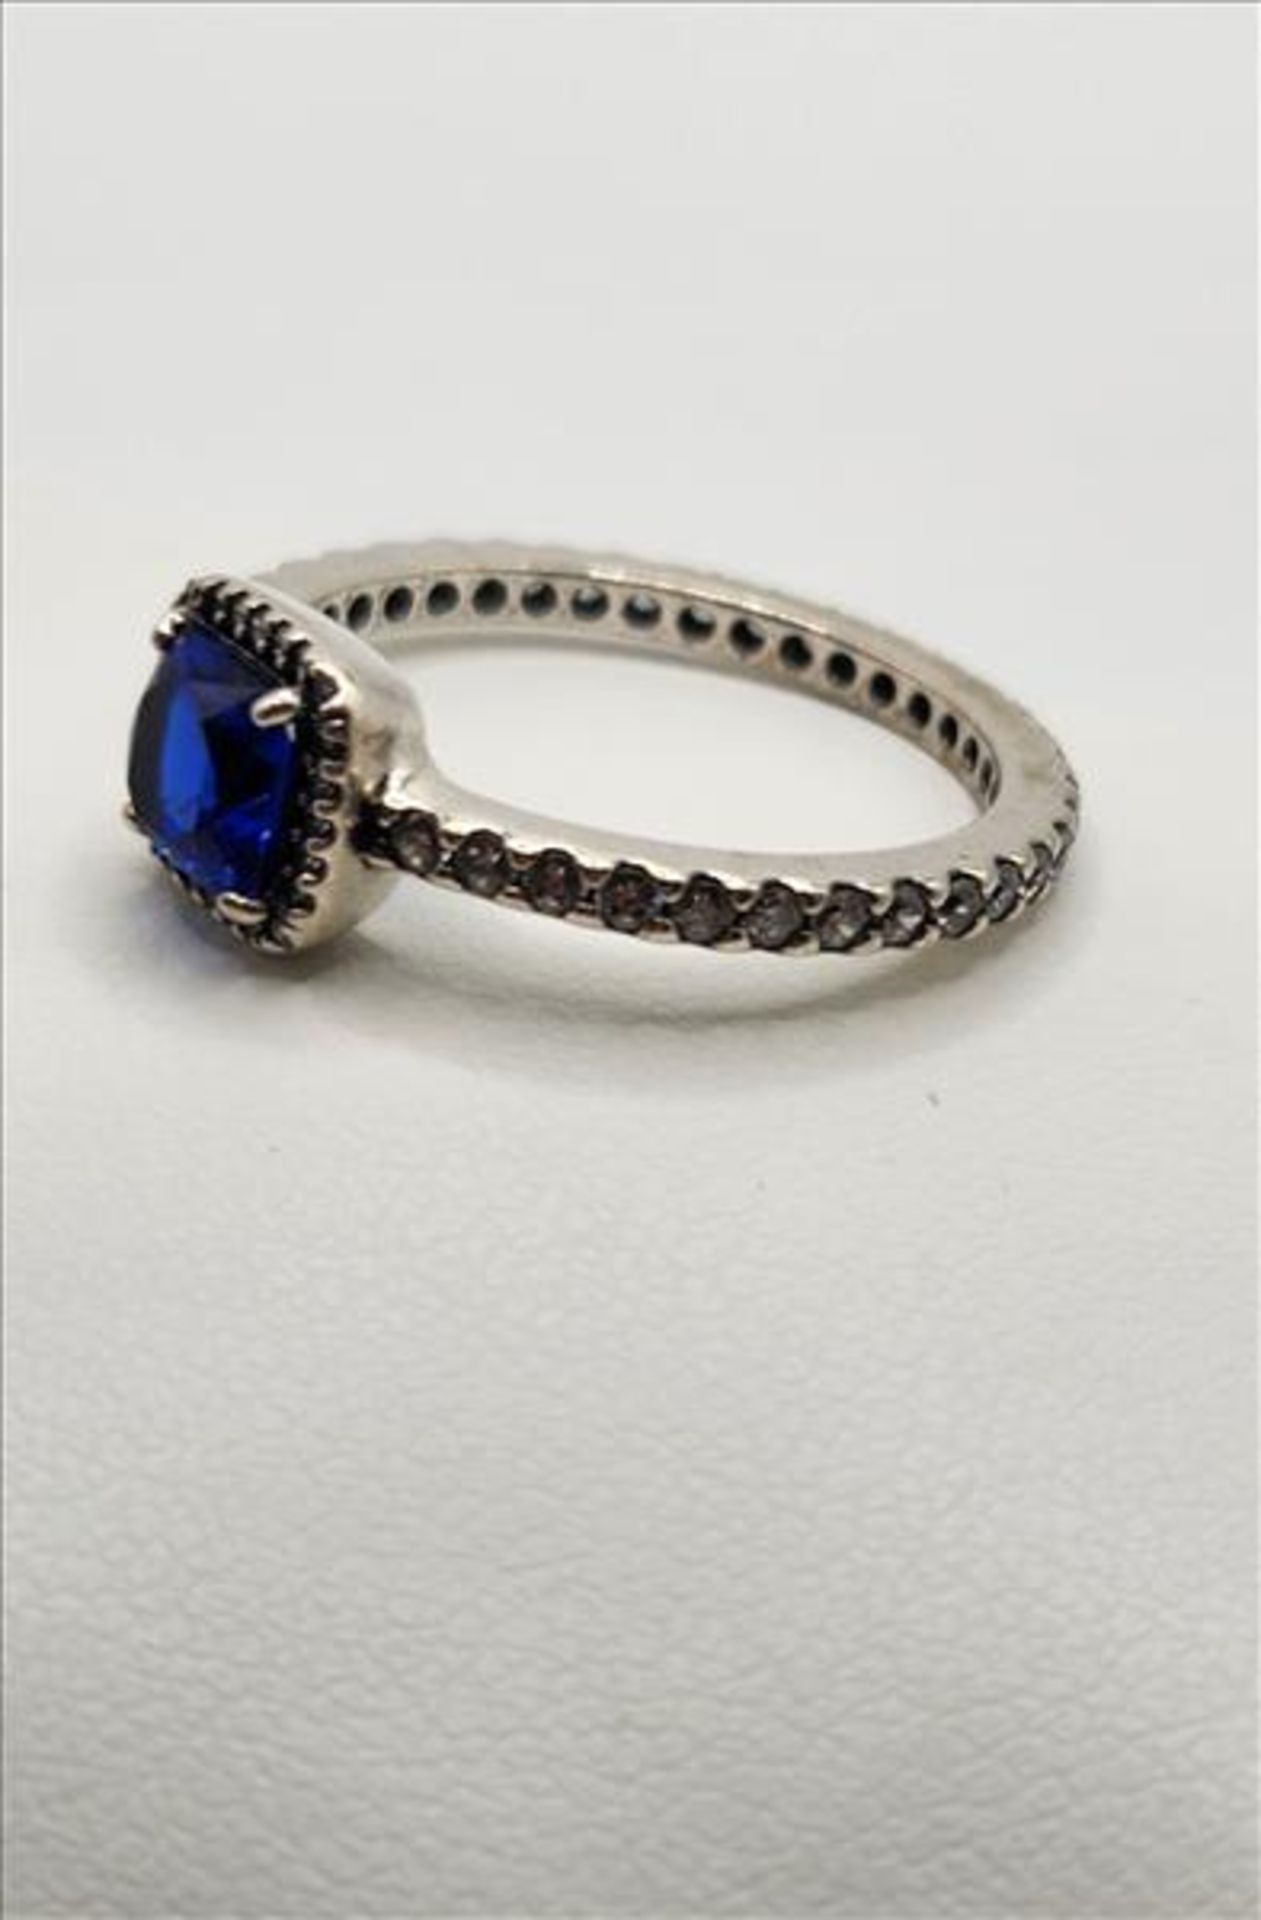 Pandora blue stone sterling silver ring - Image 2 of 4